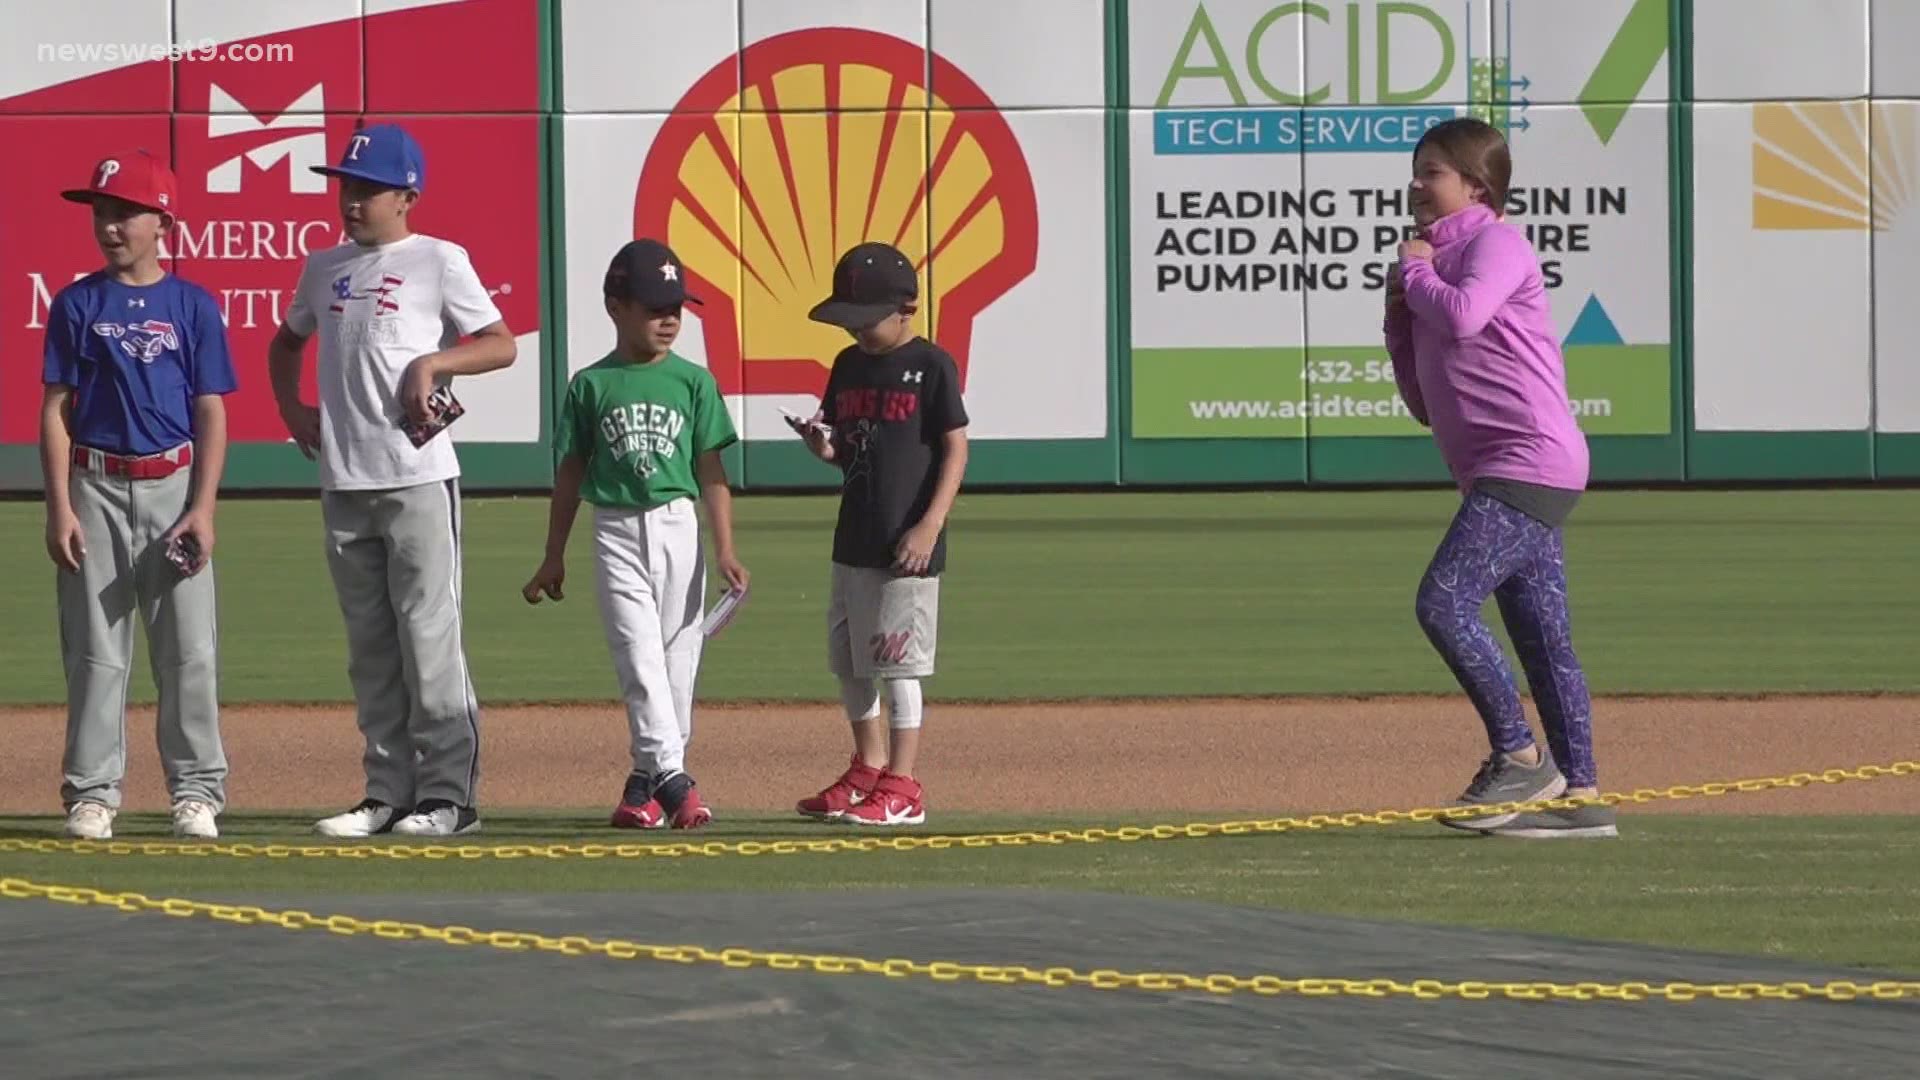 The event gives area youth a chance to compete in Major League Baseball's Pitch, Hit and Run competition.